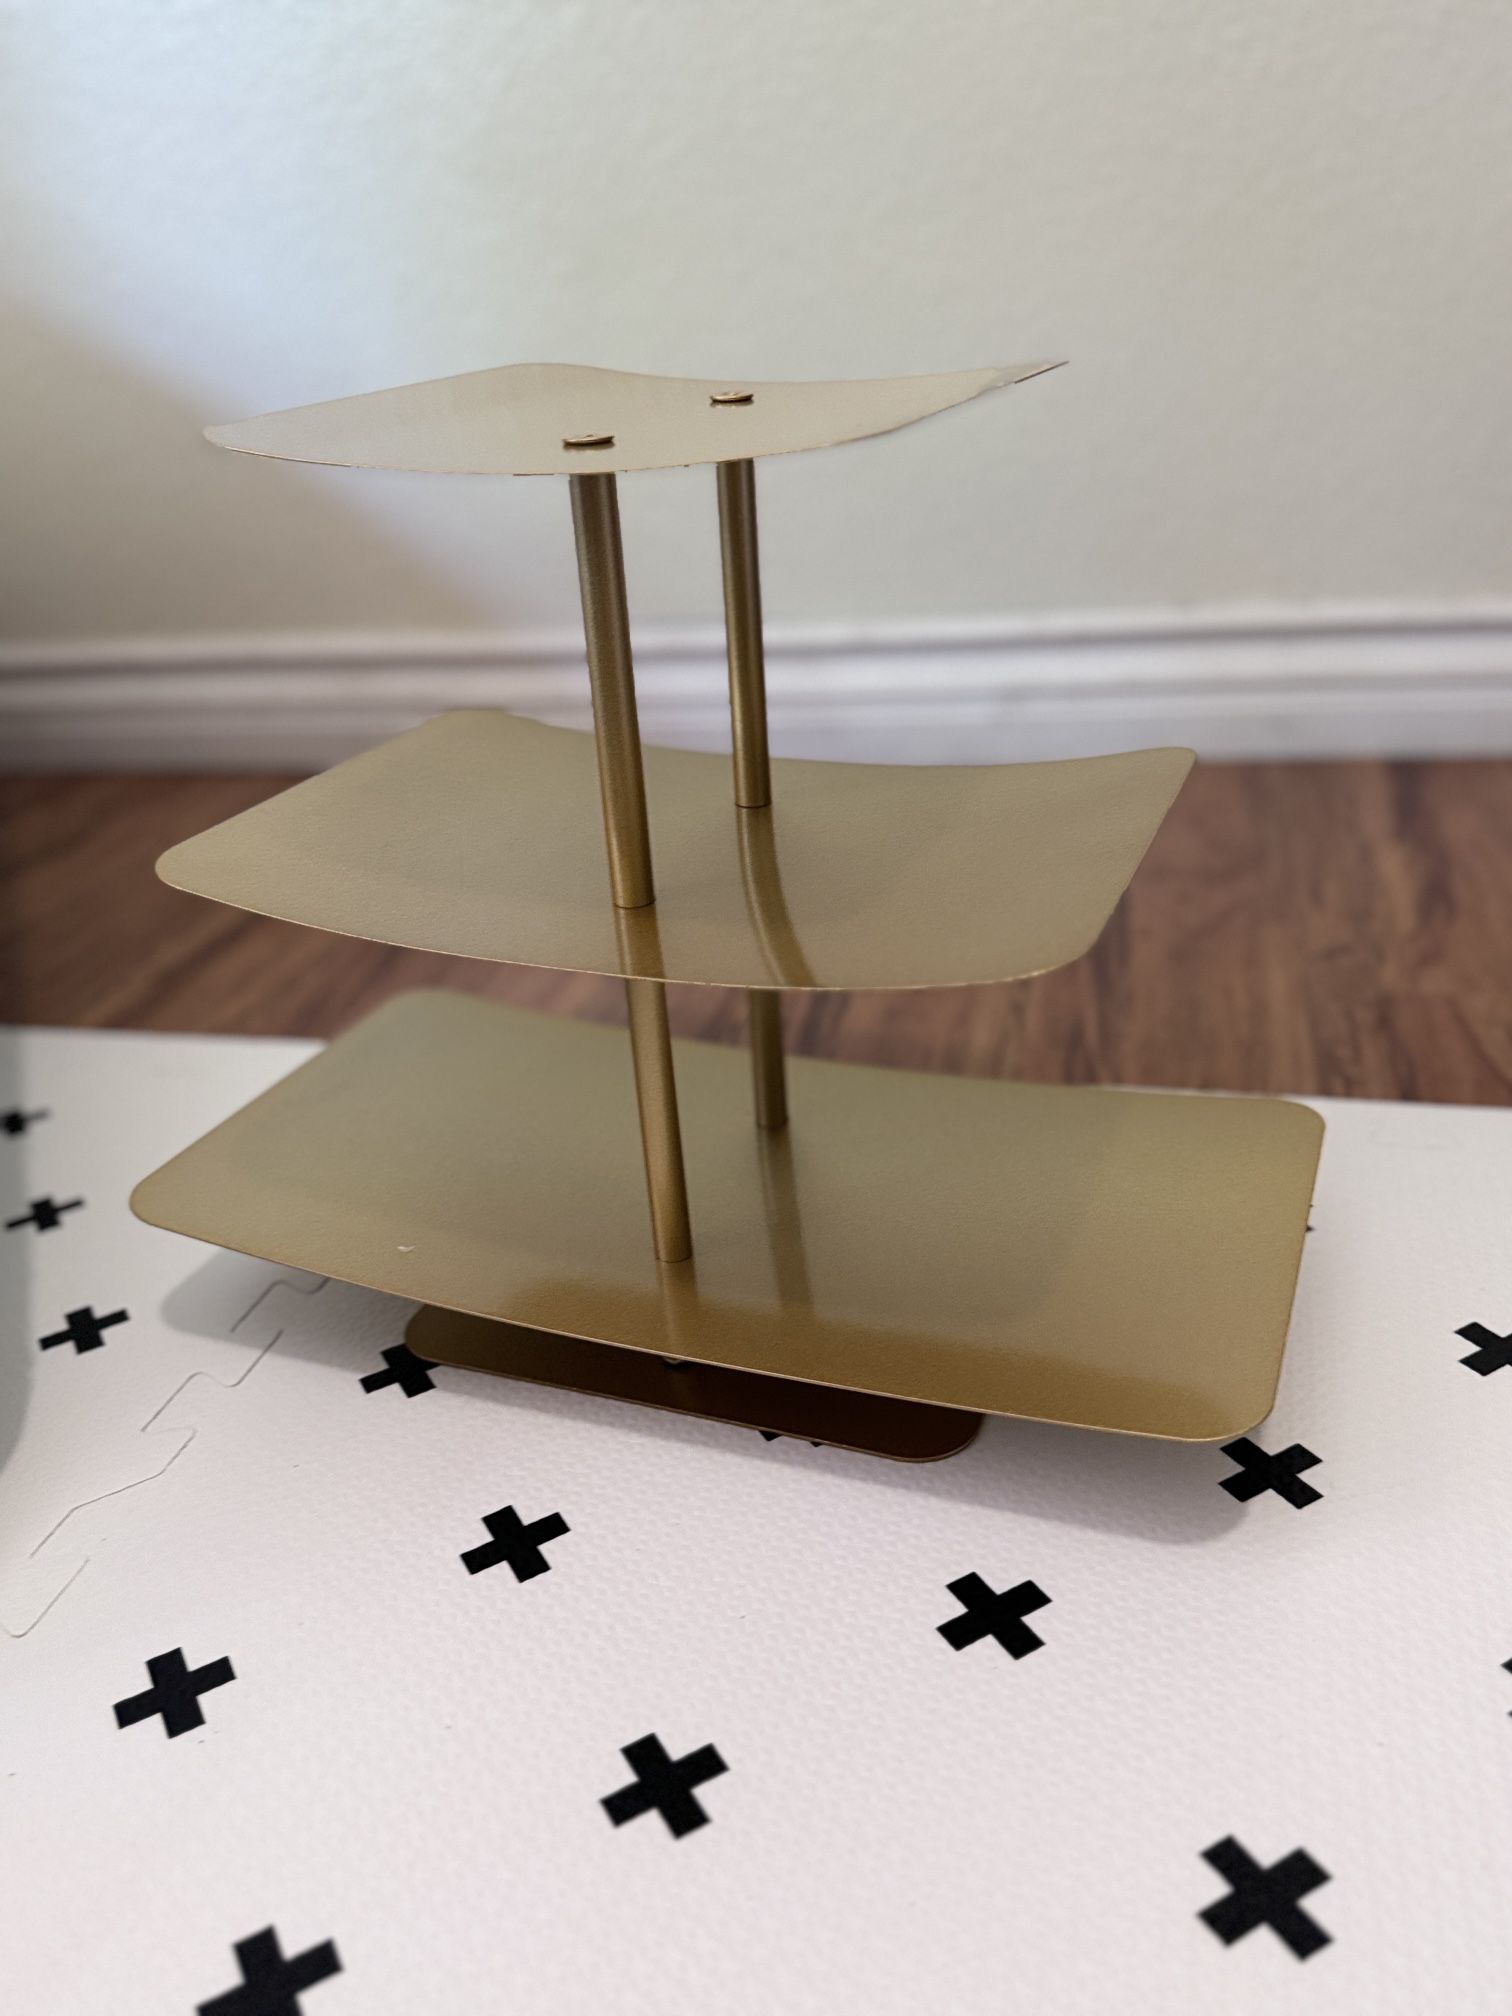 Gold Metal Tiered Cupcake Stand